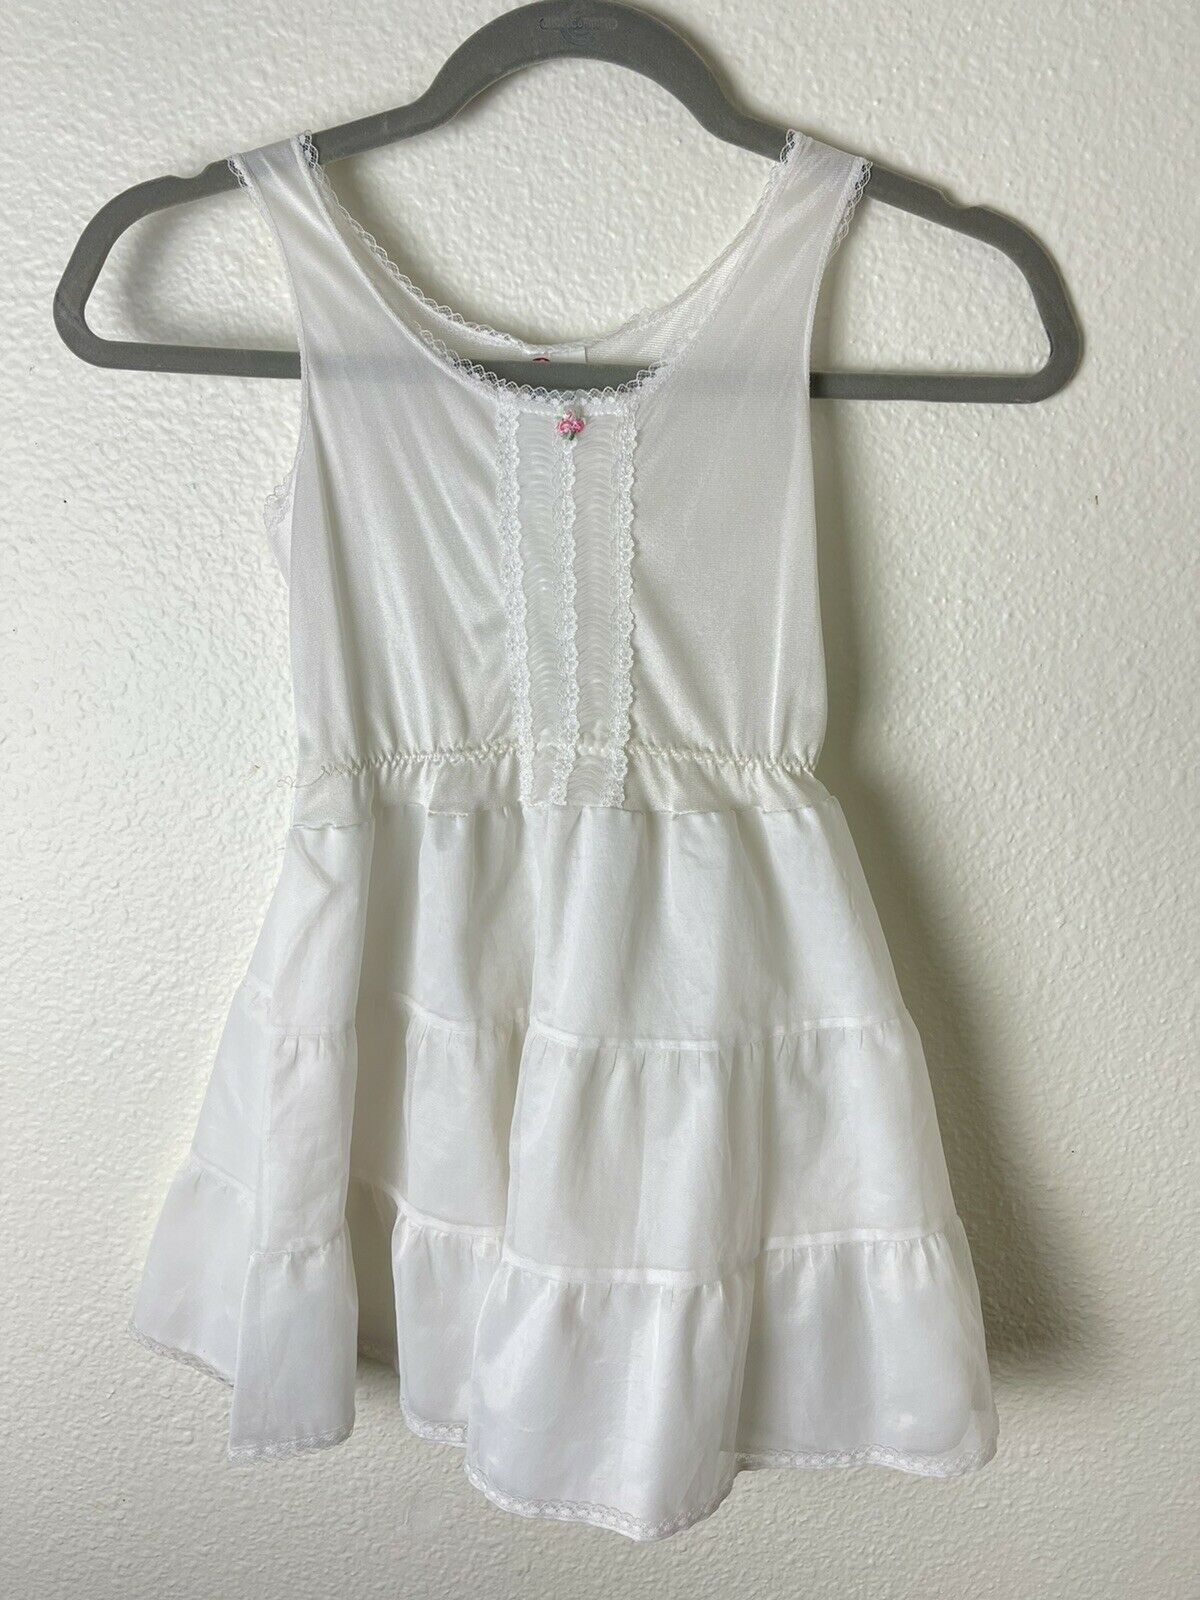 Vintage Candy Kane By Imerman Overskirt Slip Dress 6x Made In Usa